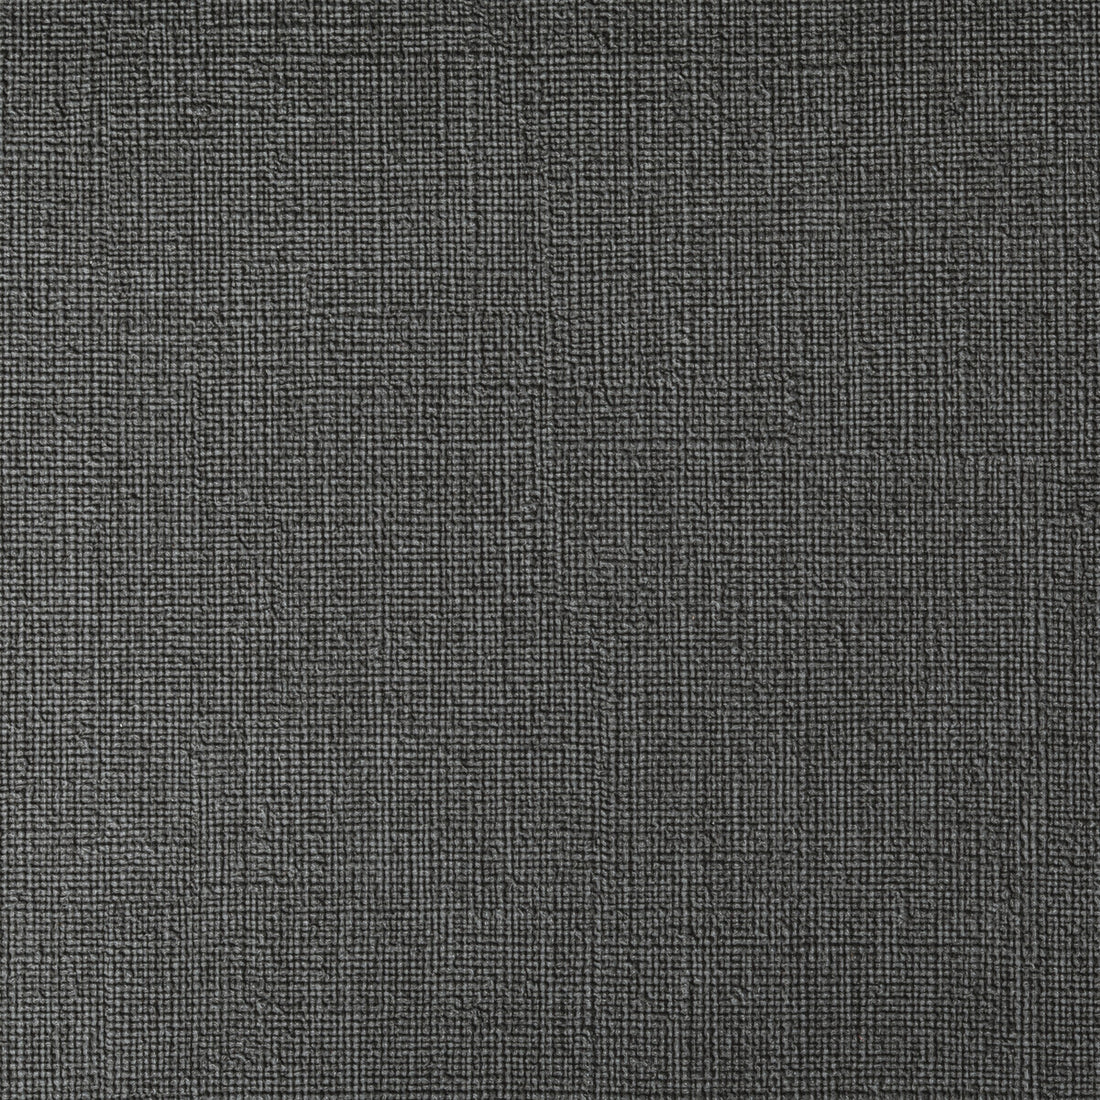 Caslin fabric in gunmetal color - pattern CASLIN.821.0 - by Kravet Contract in the Foundations / Value collection